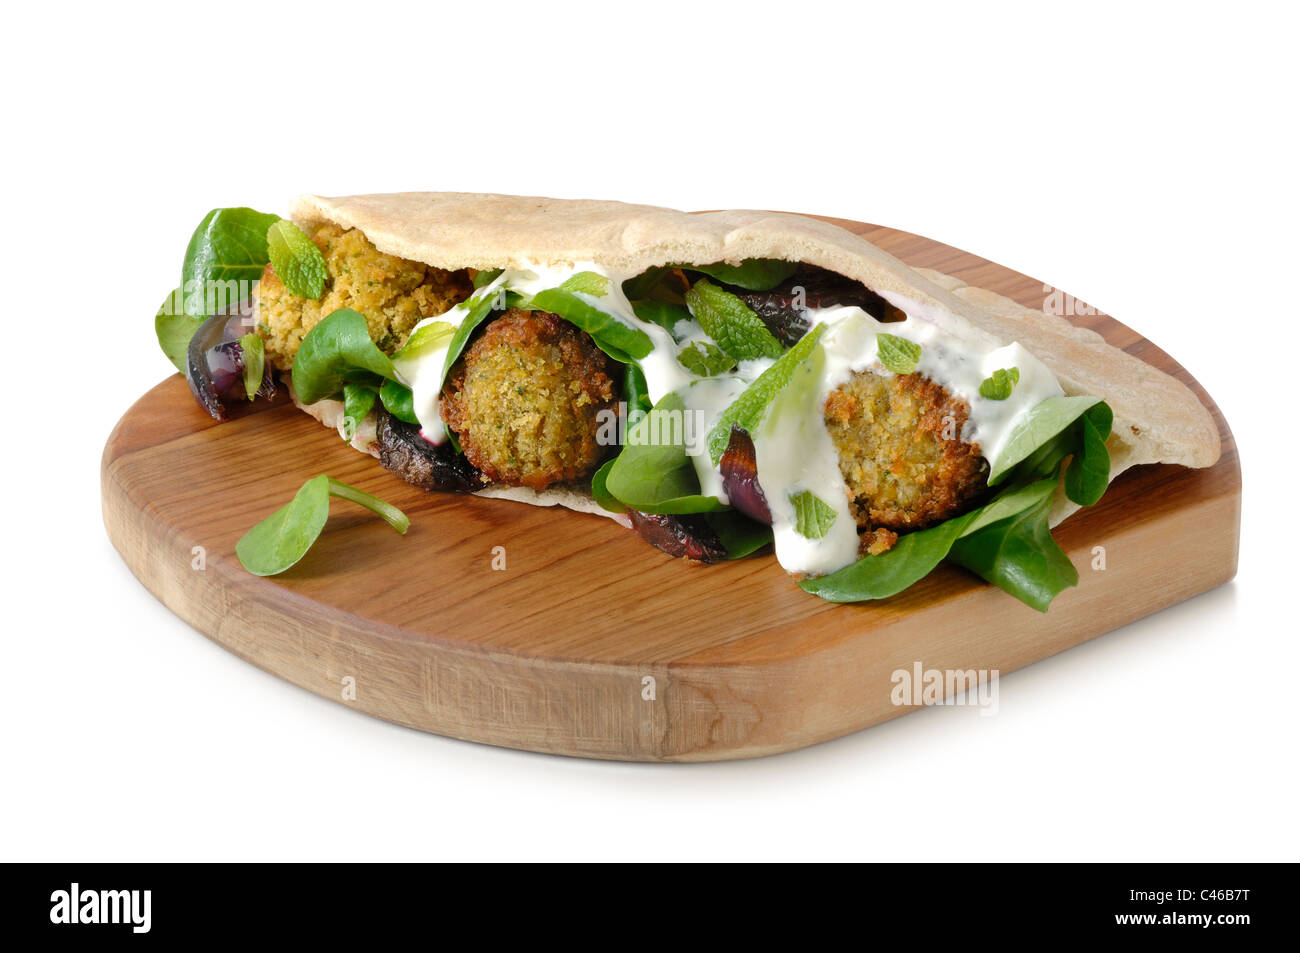 Falafel on a wooden plater. Stock Photo